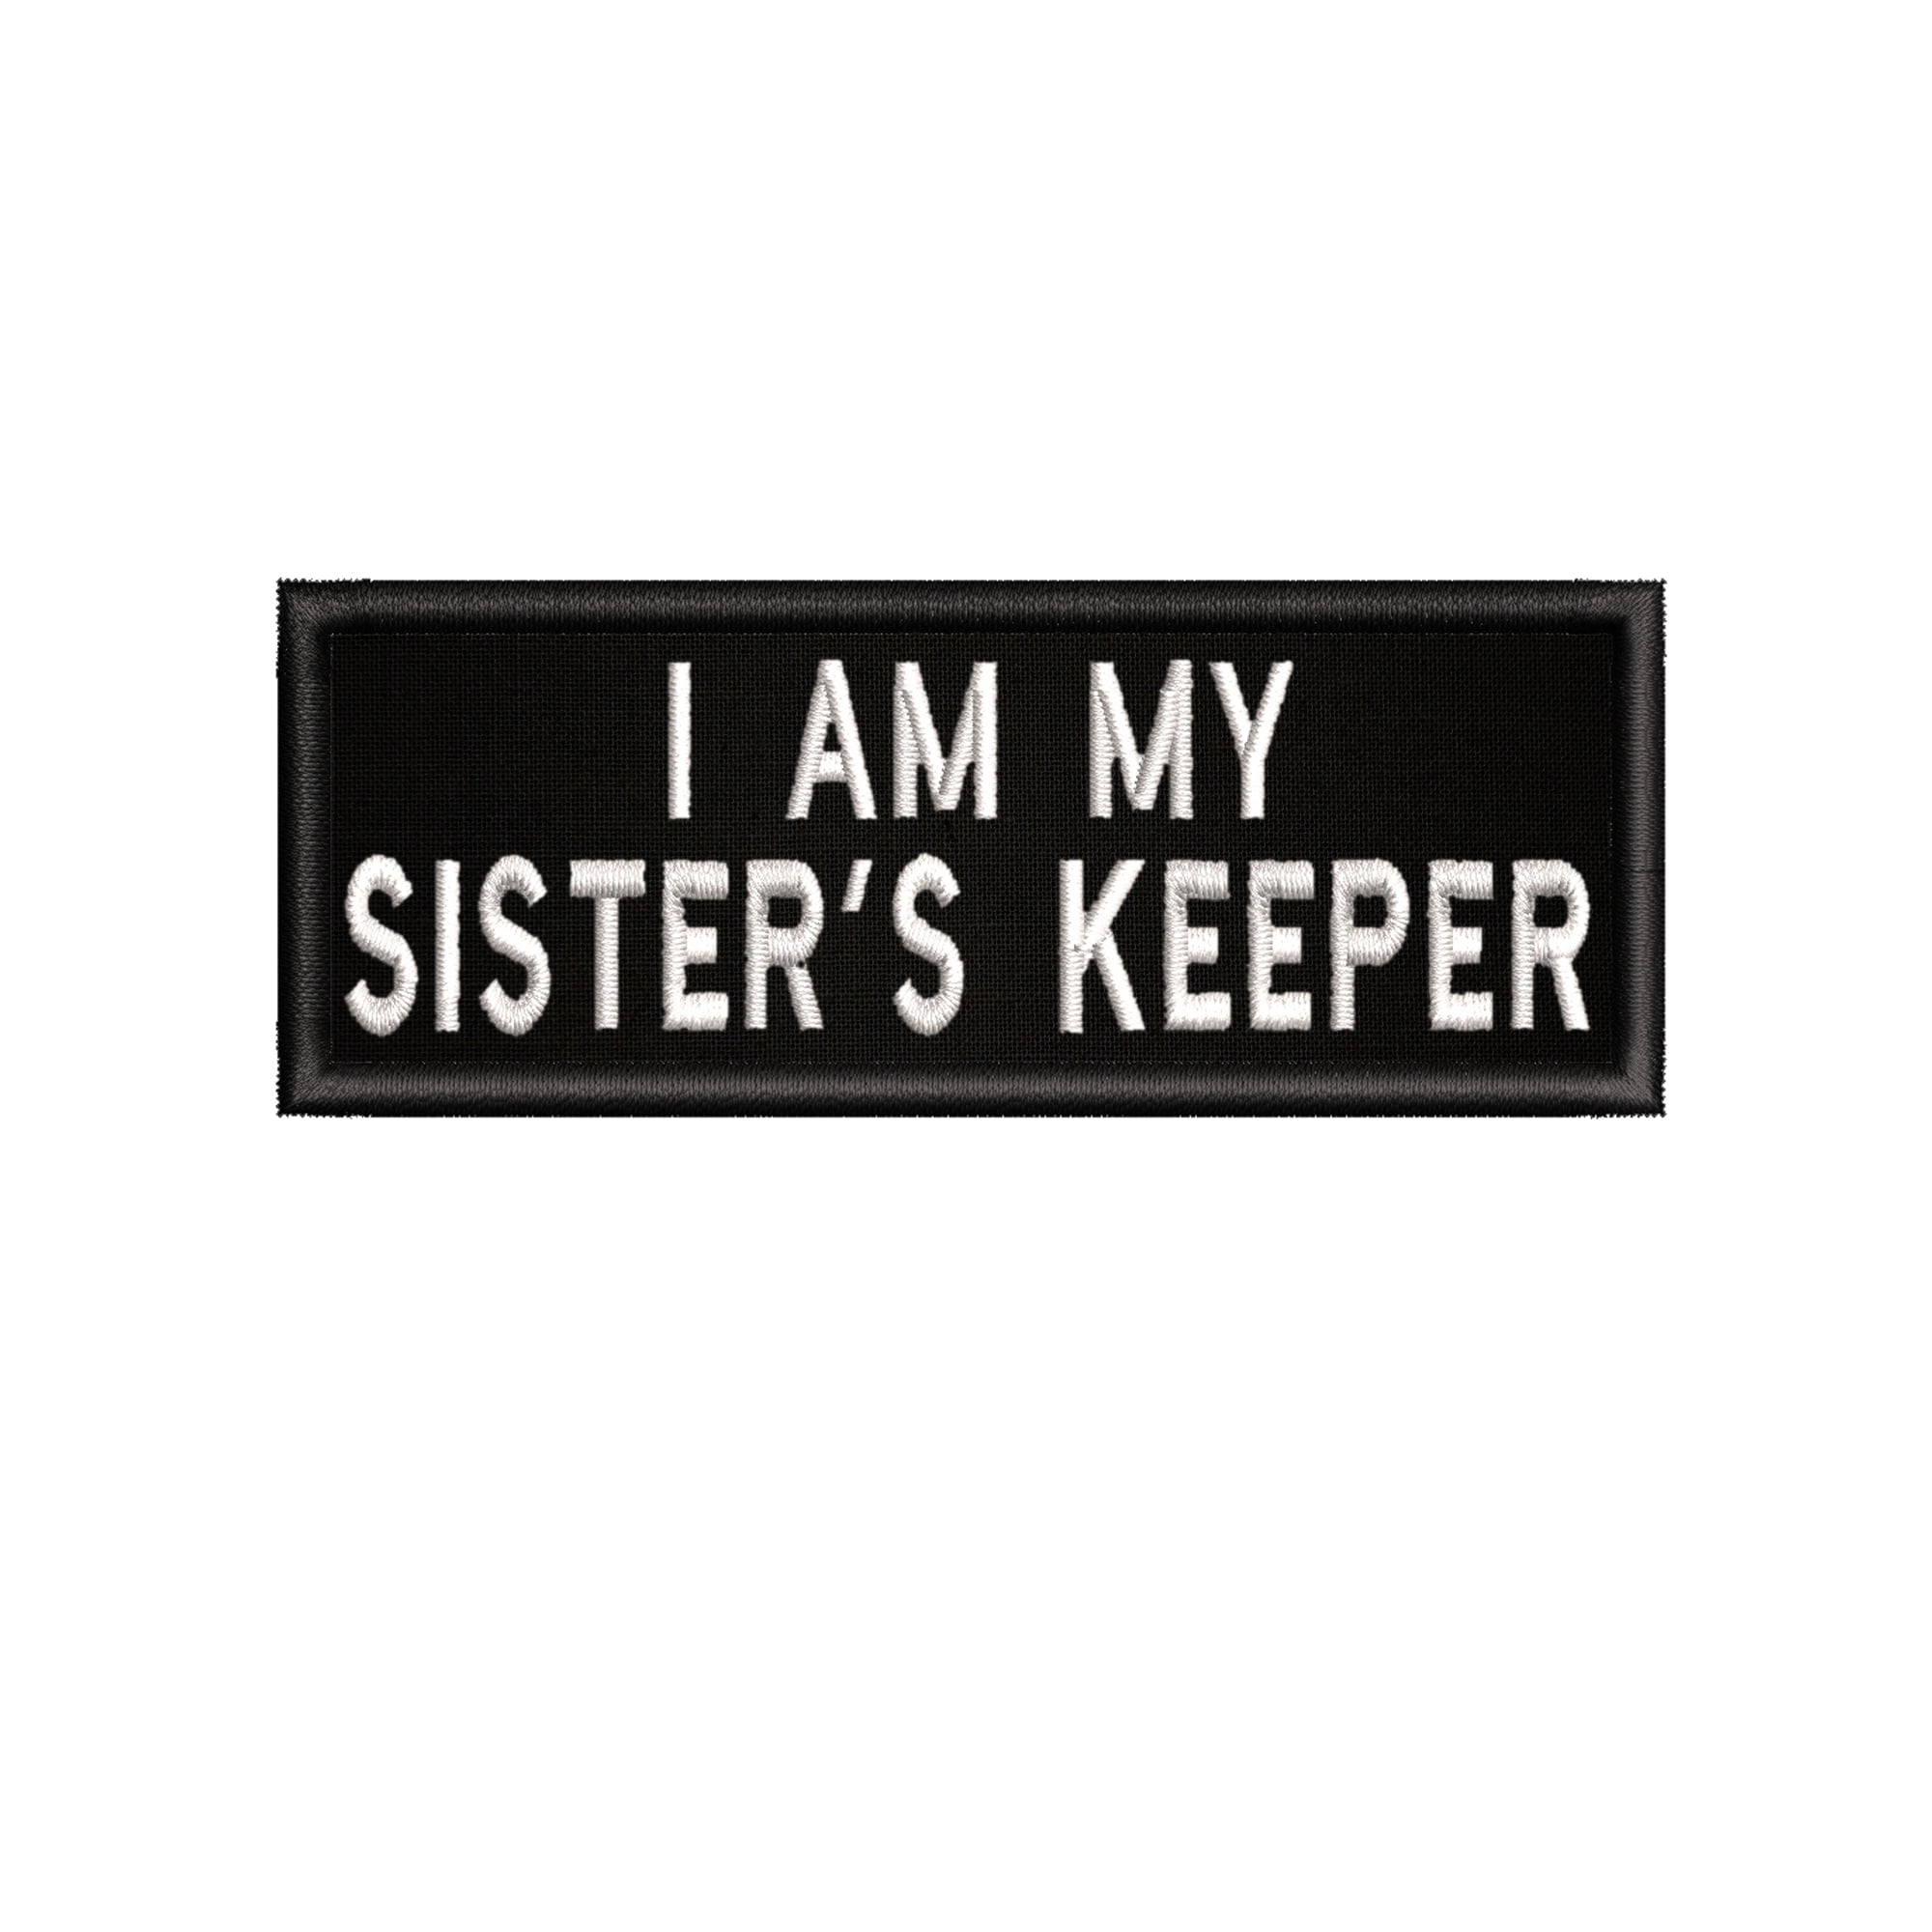 I am My Sisters Keeper Yellow Clothes Iron on Sew on Embroidered Patch appliqué 